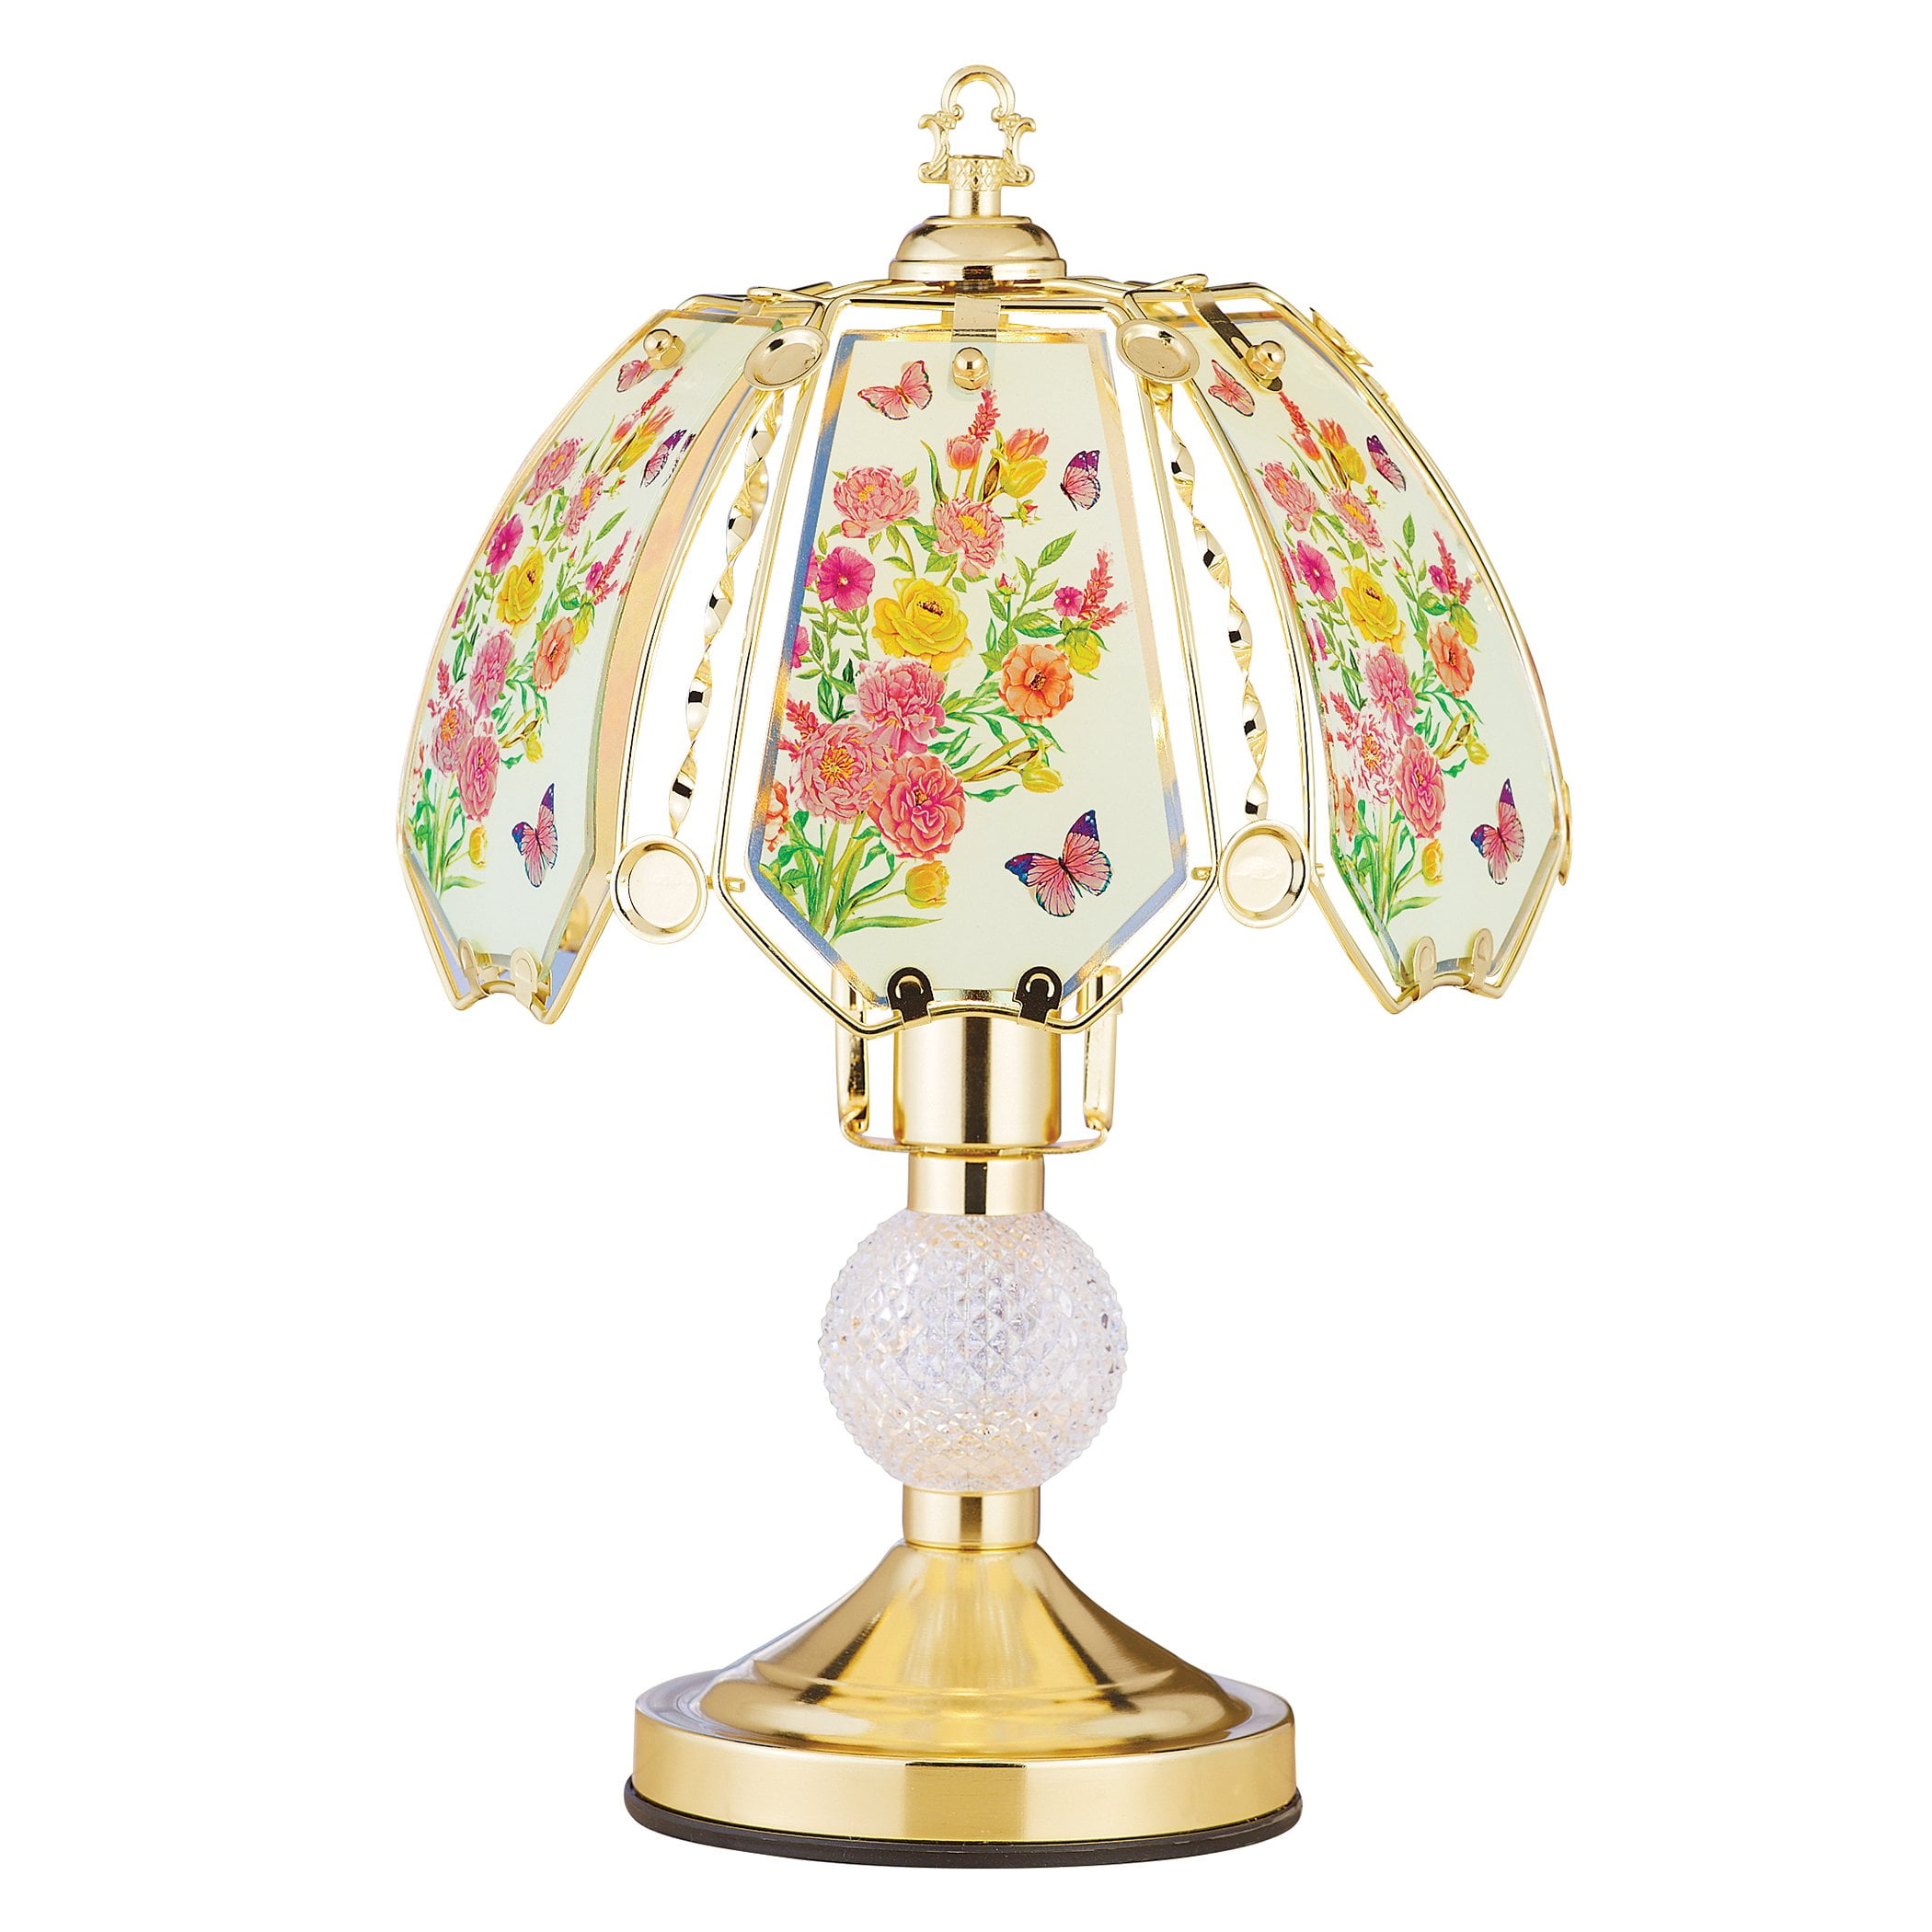 Peony Garden Gold-Toned Tabletop Touch Lamp 